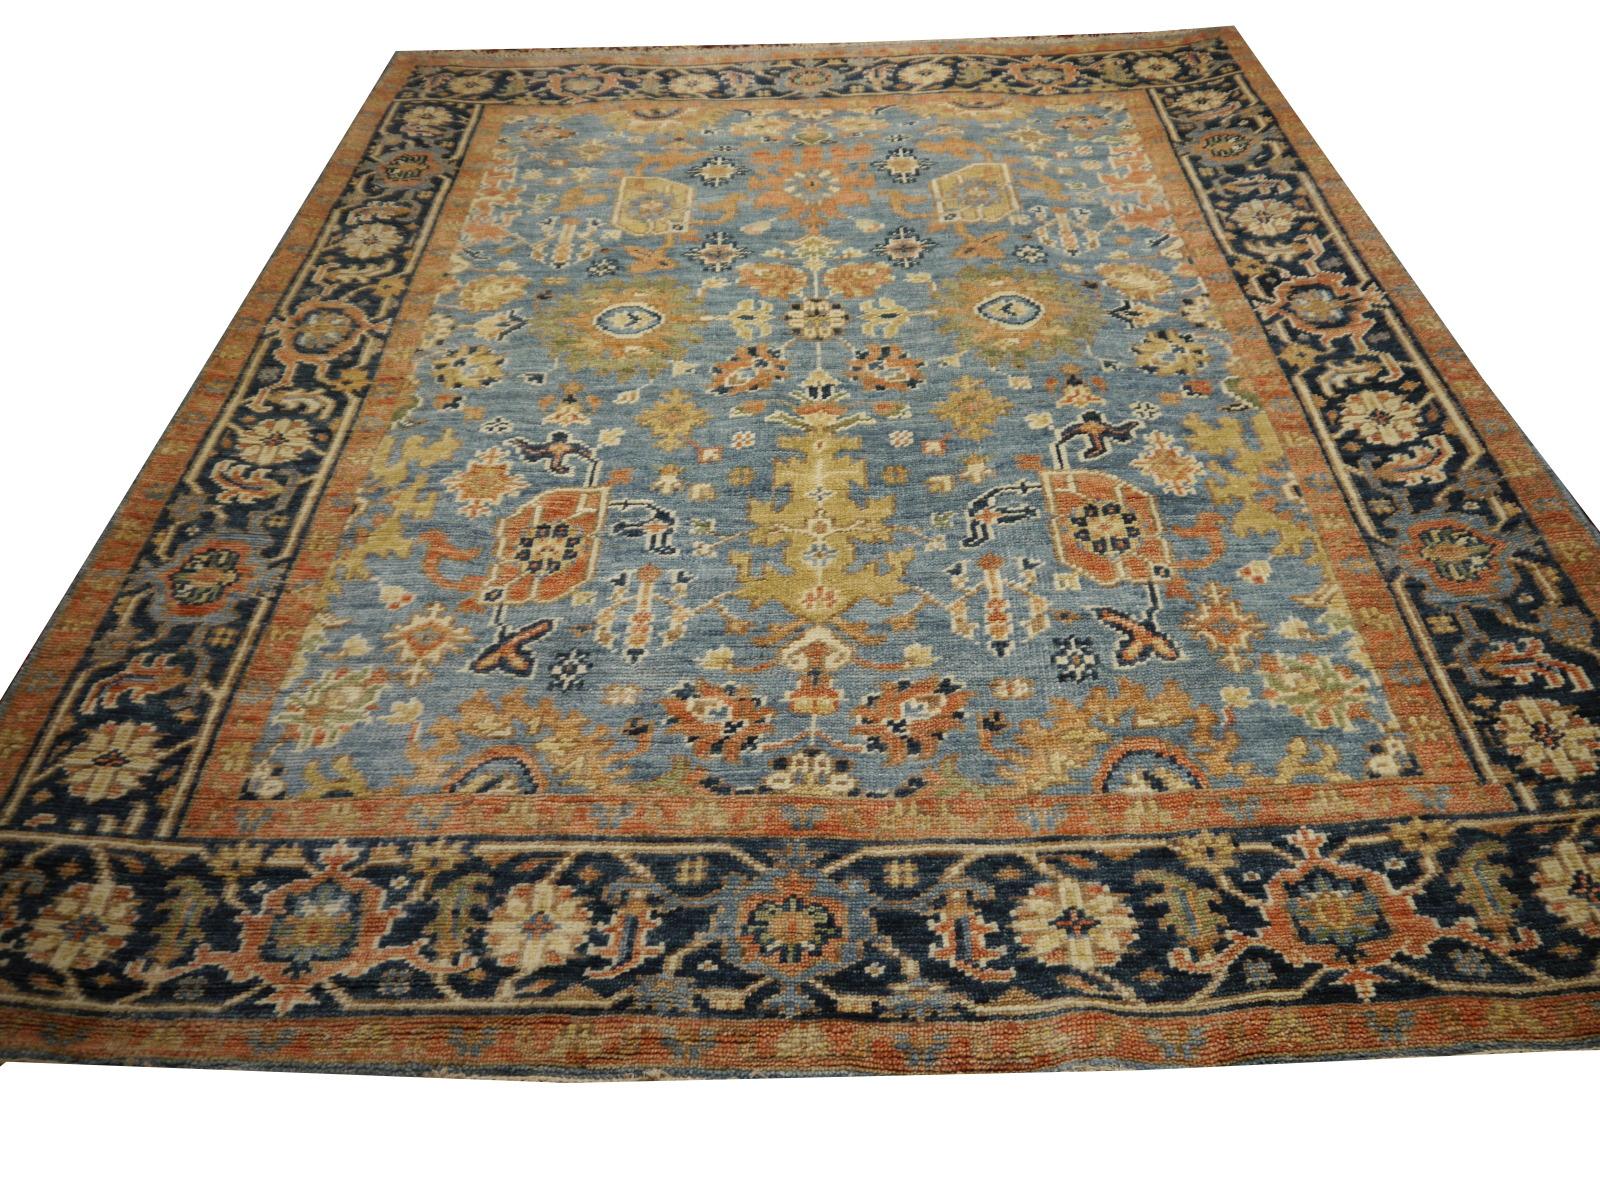 Heriz Serapi Heriz Rug hand-knotted low wool pile vintage look 8 x 10 ft from India For Sale